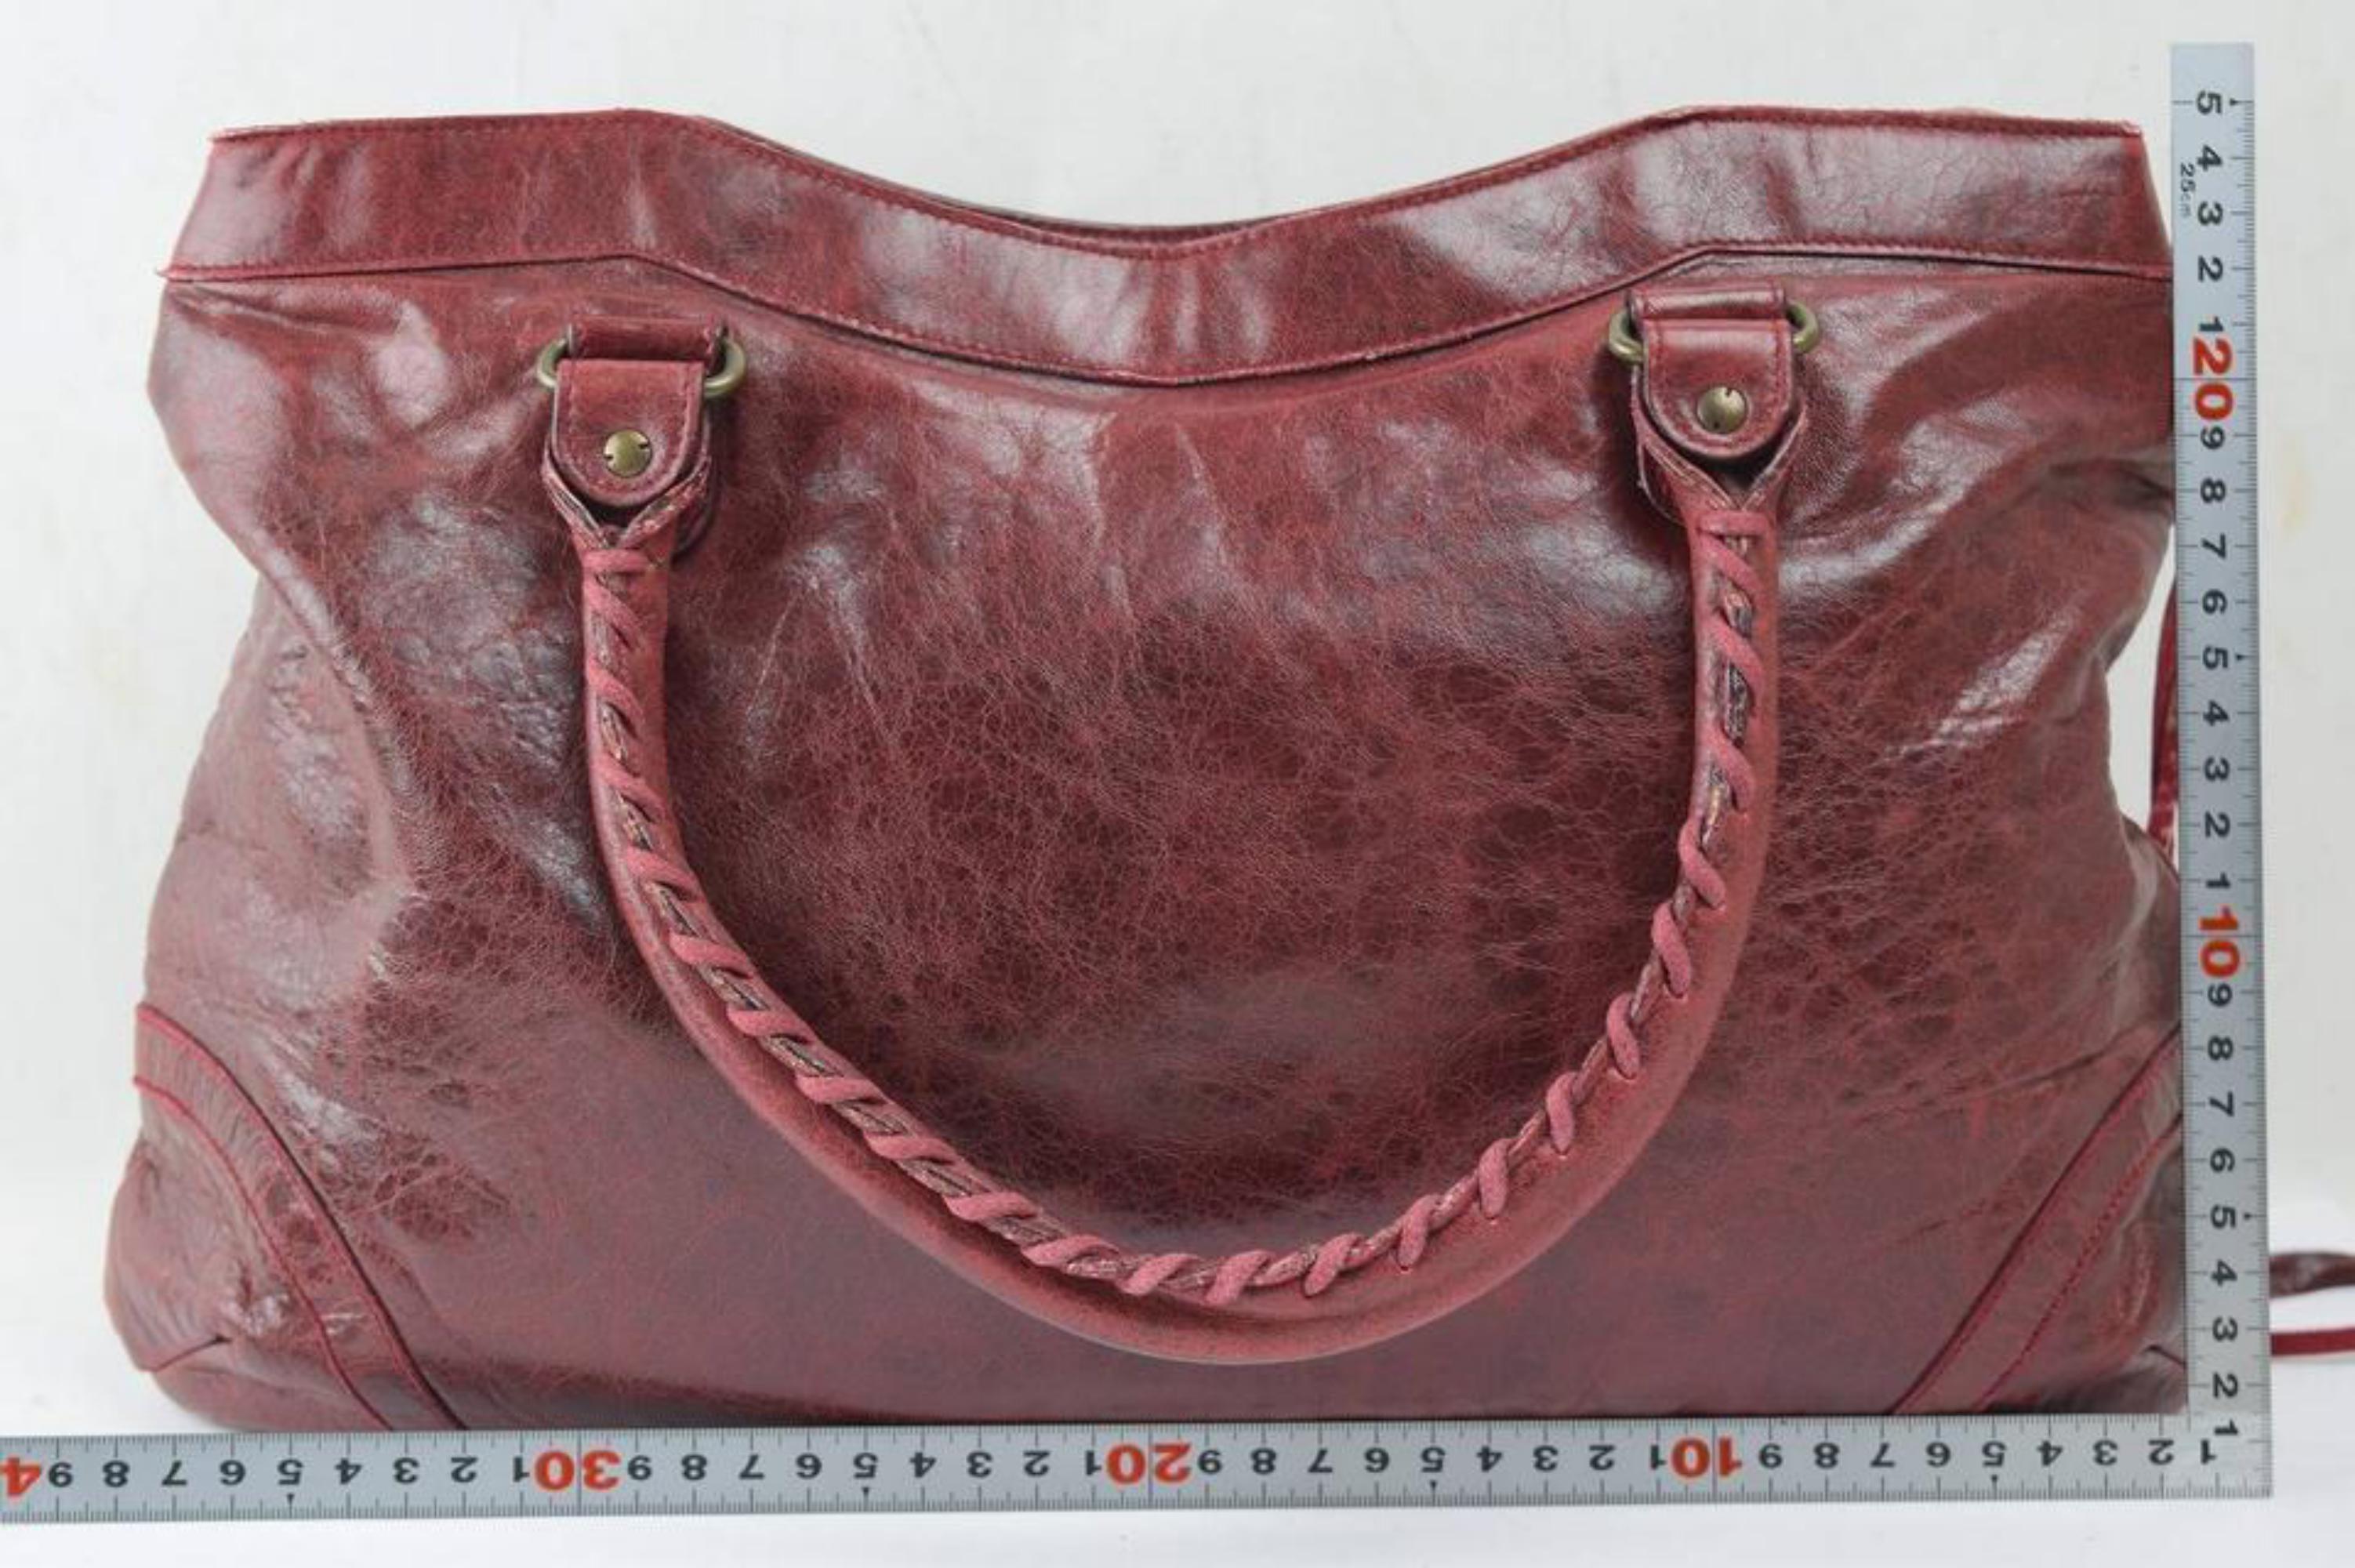 Balenciaga Bordeaux Chevre Purse Handbag 866829 Red Leather Satchel In Fair Condition For Sale In Forest Hills, NY